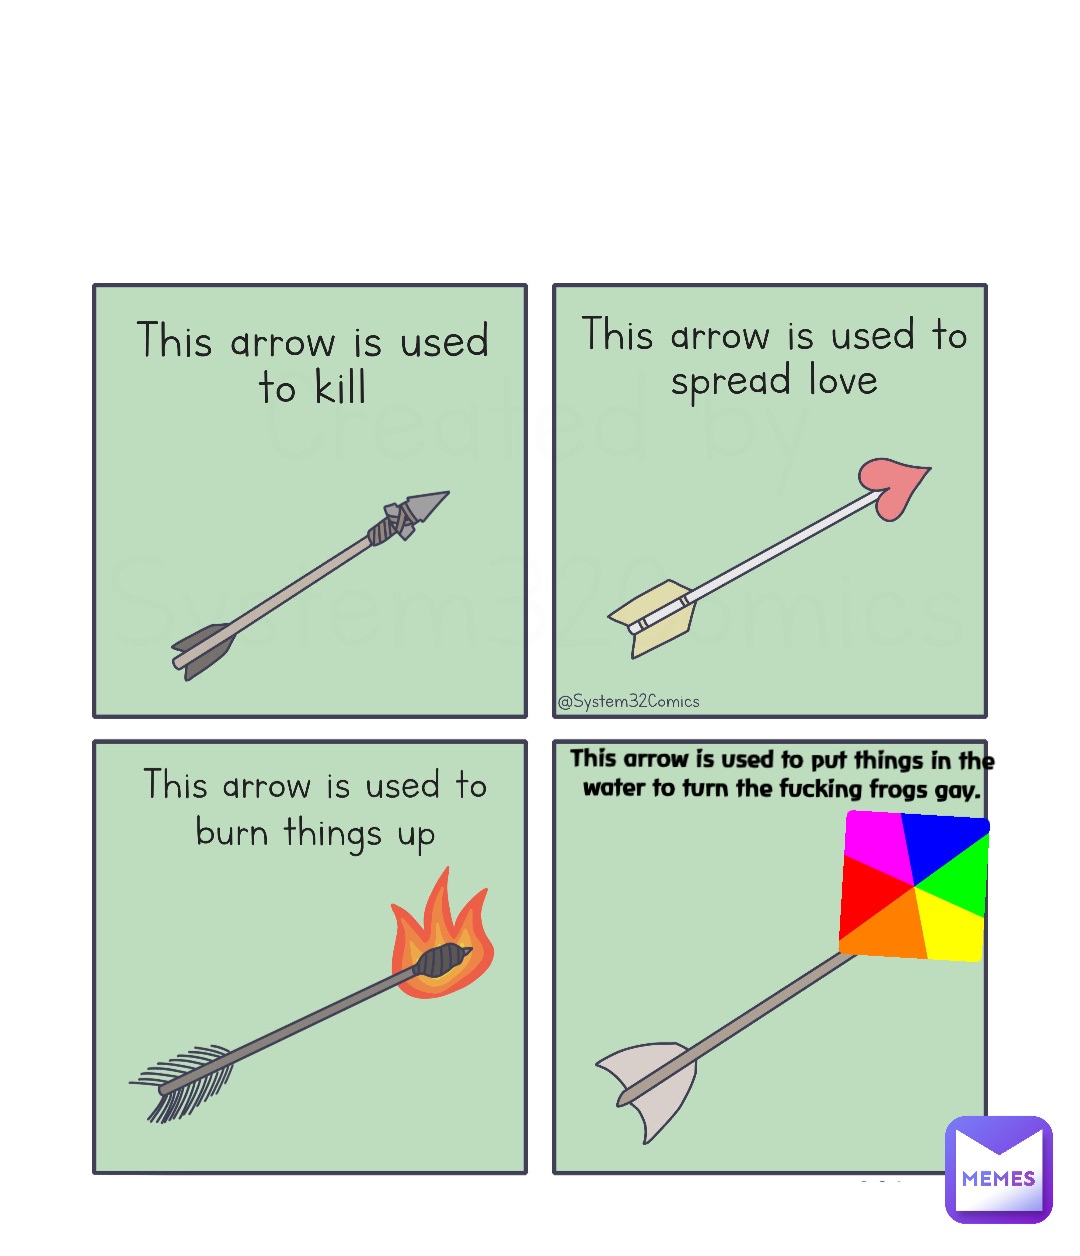 This arrow is used to put things in the water to turn the fucking frogs gay.